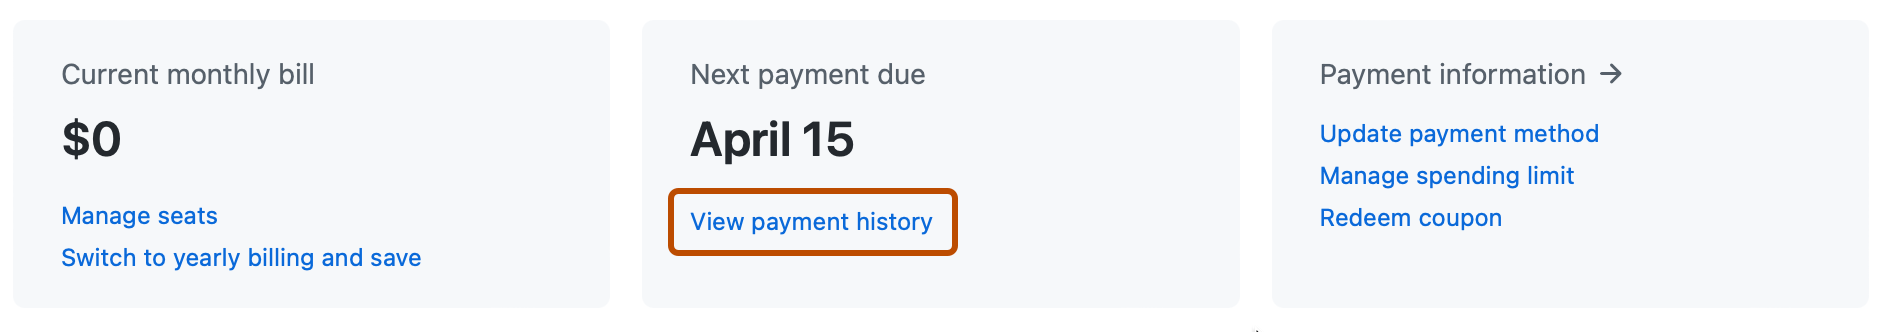 Screenshot of the summary section of the billing settings page. In the "Next payment due" box, a link, labeled "View payment history", is highlighted with an orange outline.